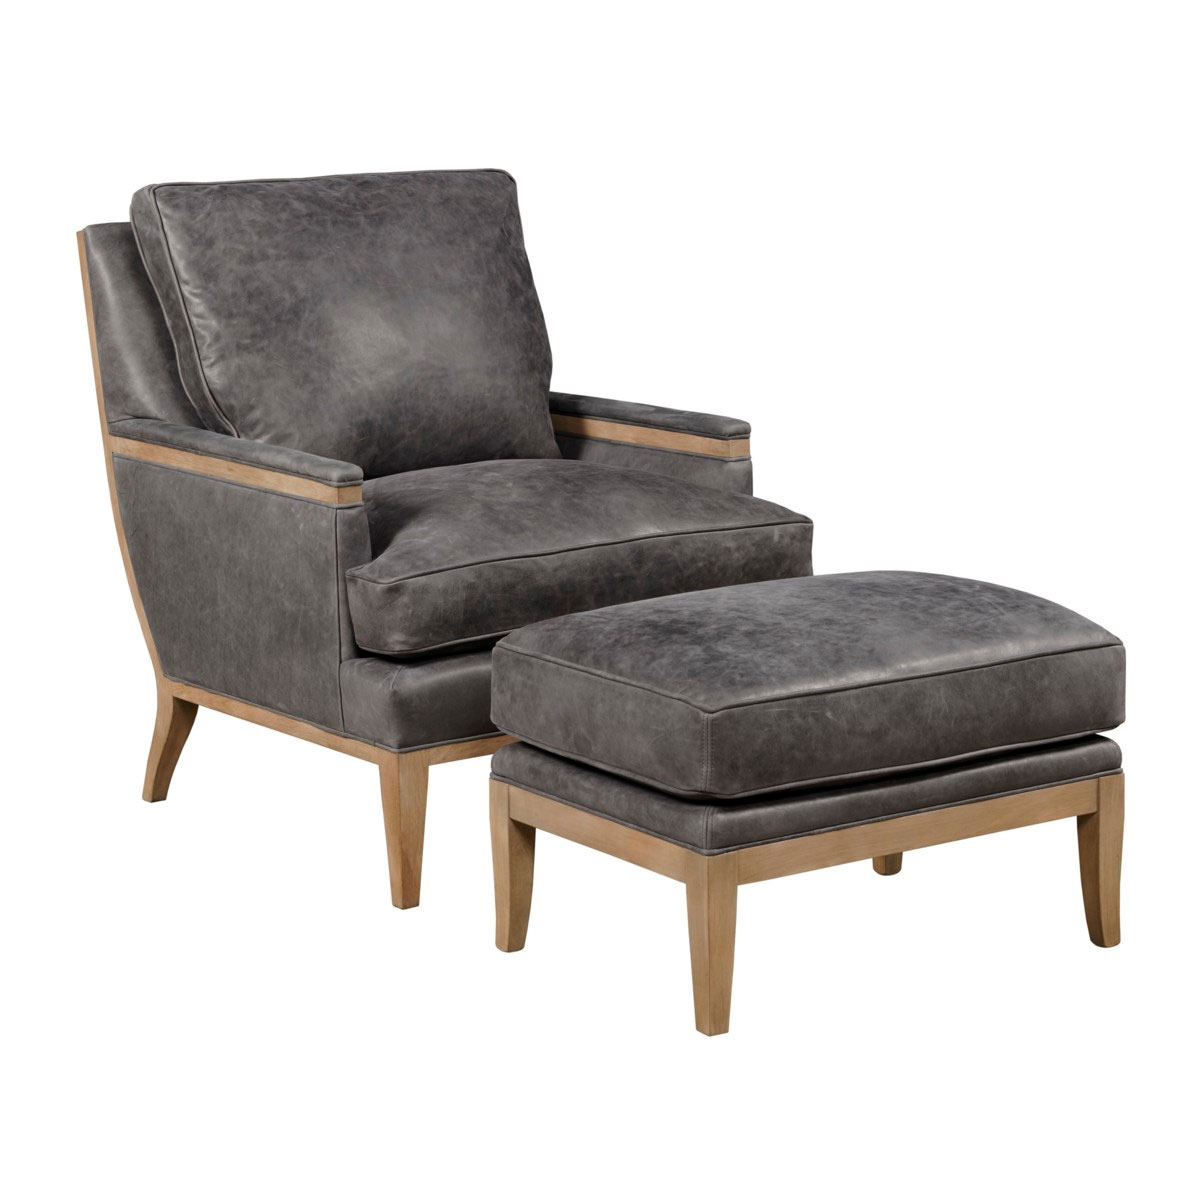 Our House 763 Oslo Lounge Chair and 763-O Oslo Ottoman